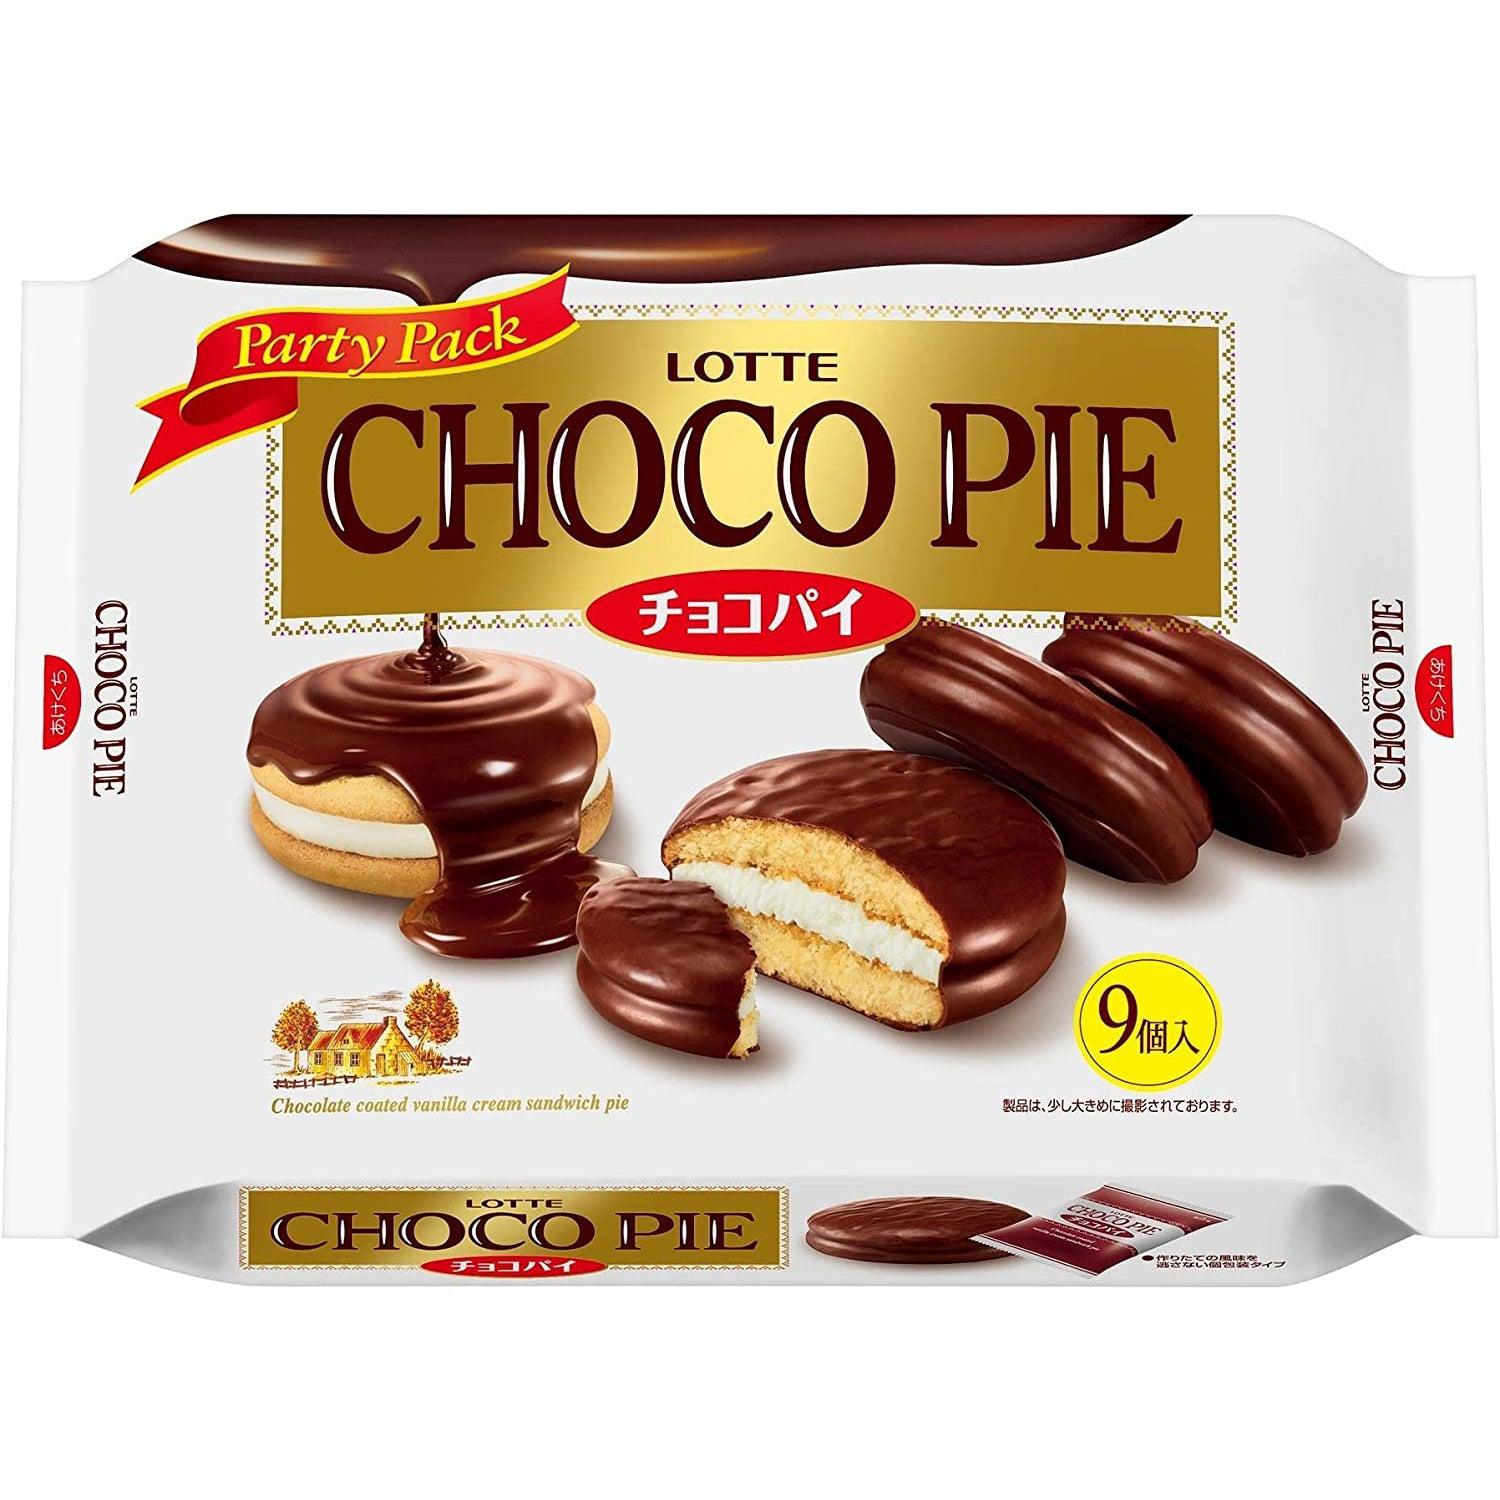 Lotte Choco Pie Snack Cake Party Pack 9 Pieces